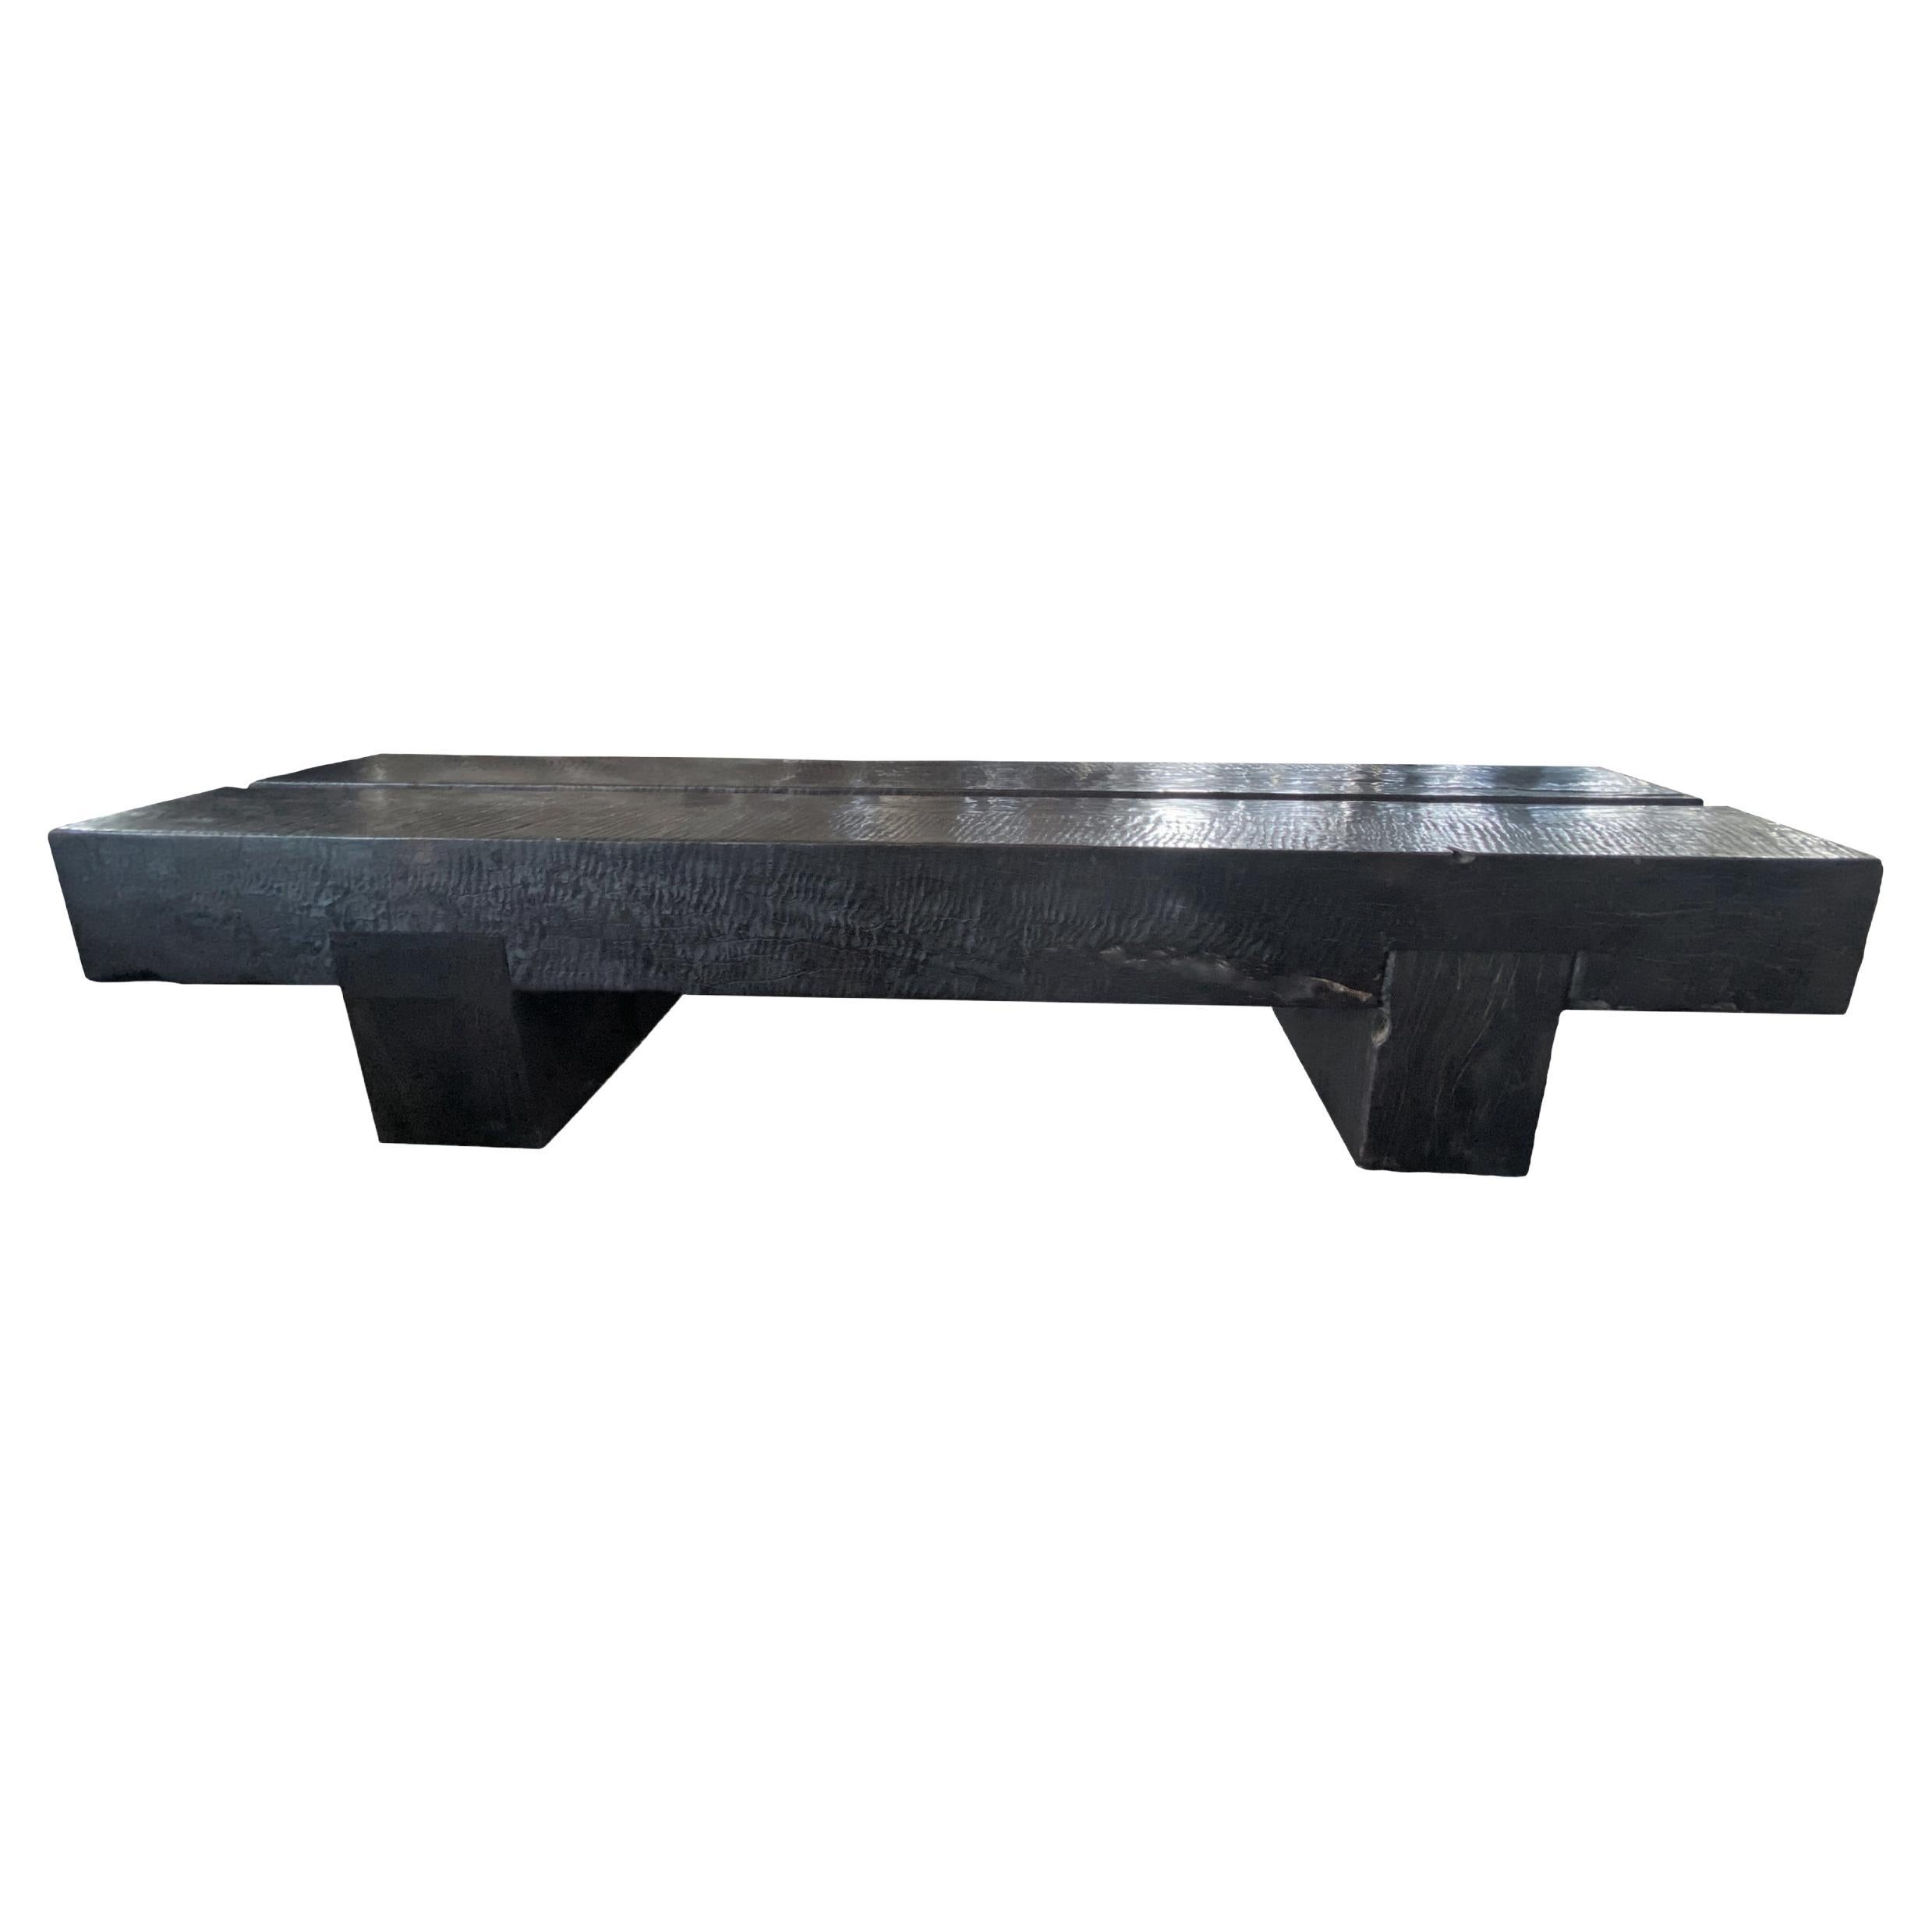 Sculptural Solid Mango Wood Bench with Burnt Finish Modern Organic